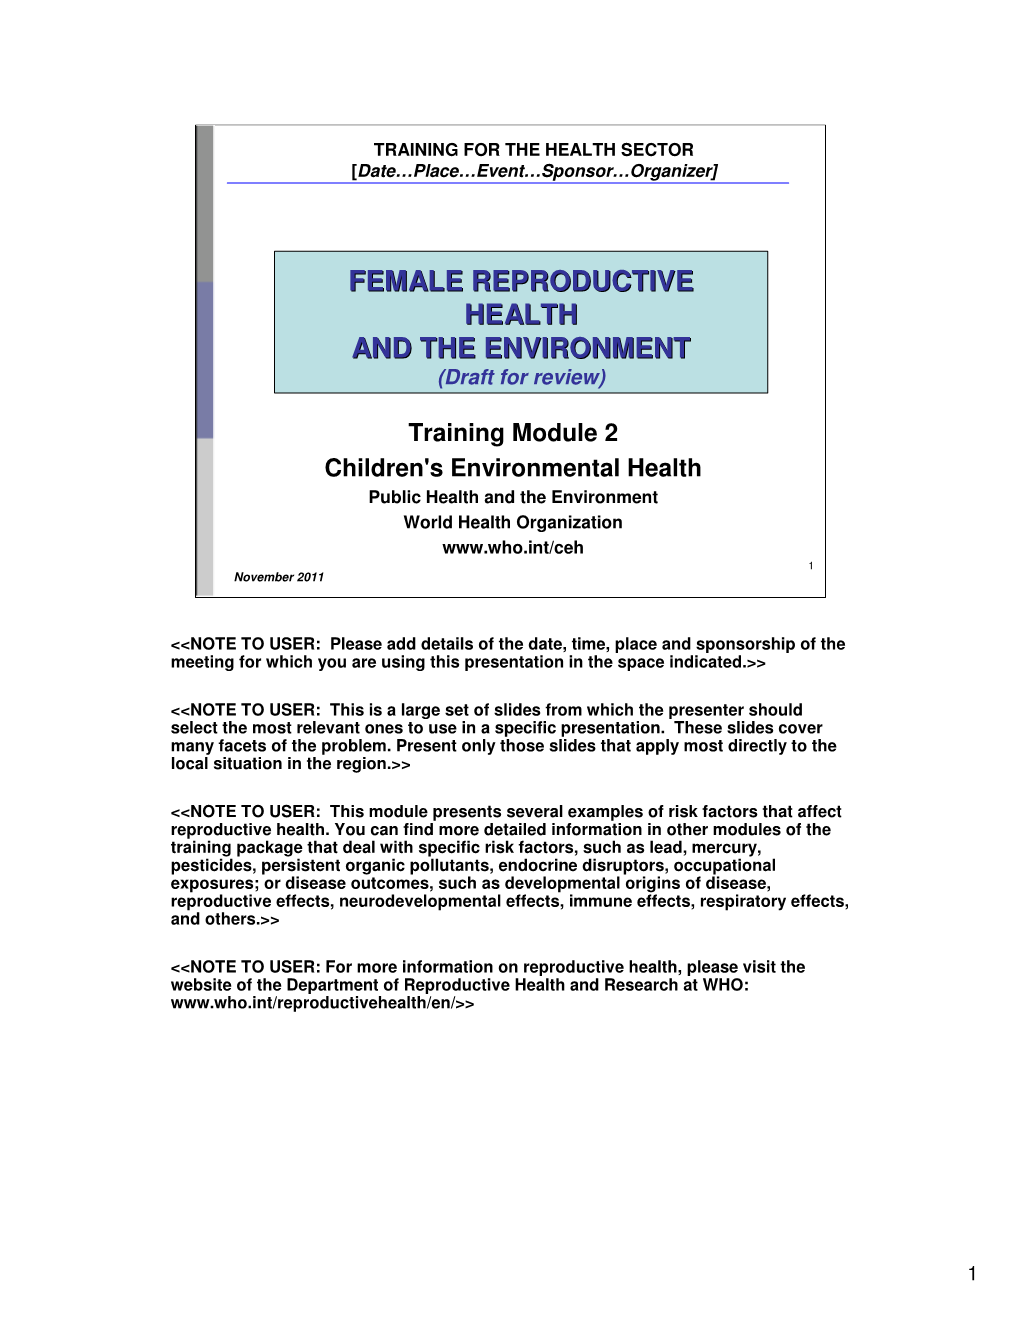 FEMALE REPRODUCTIVE HEALTH and the ENVIRONMENT (Draft for Review)